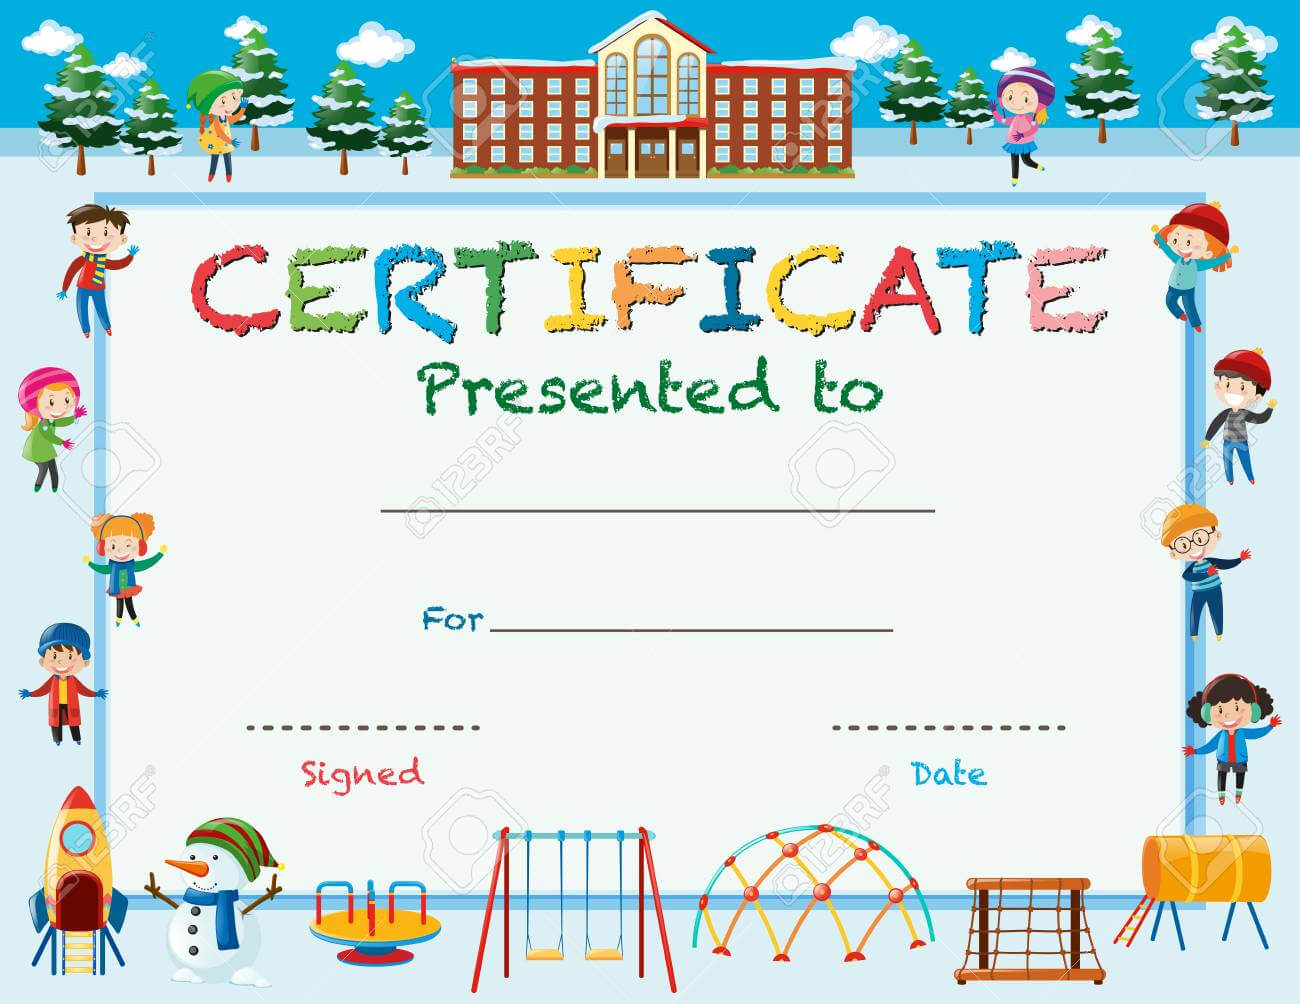 Certificate Template With Kids In Winter At School Illustration In Free School Certificate Templates